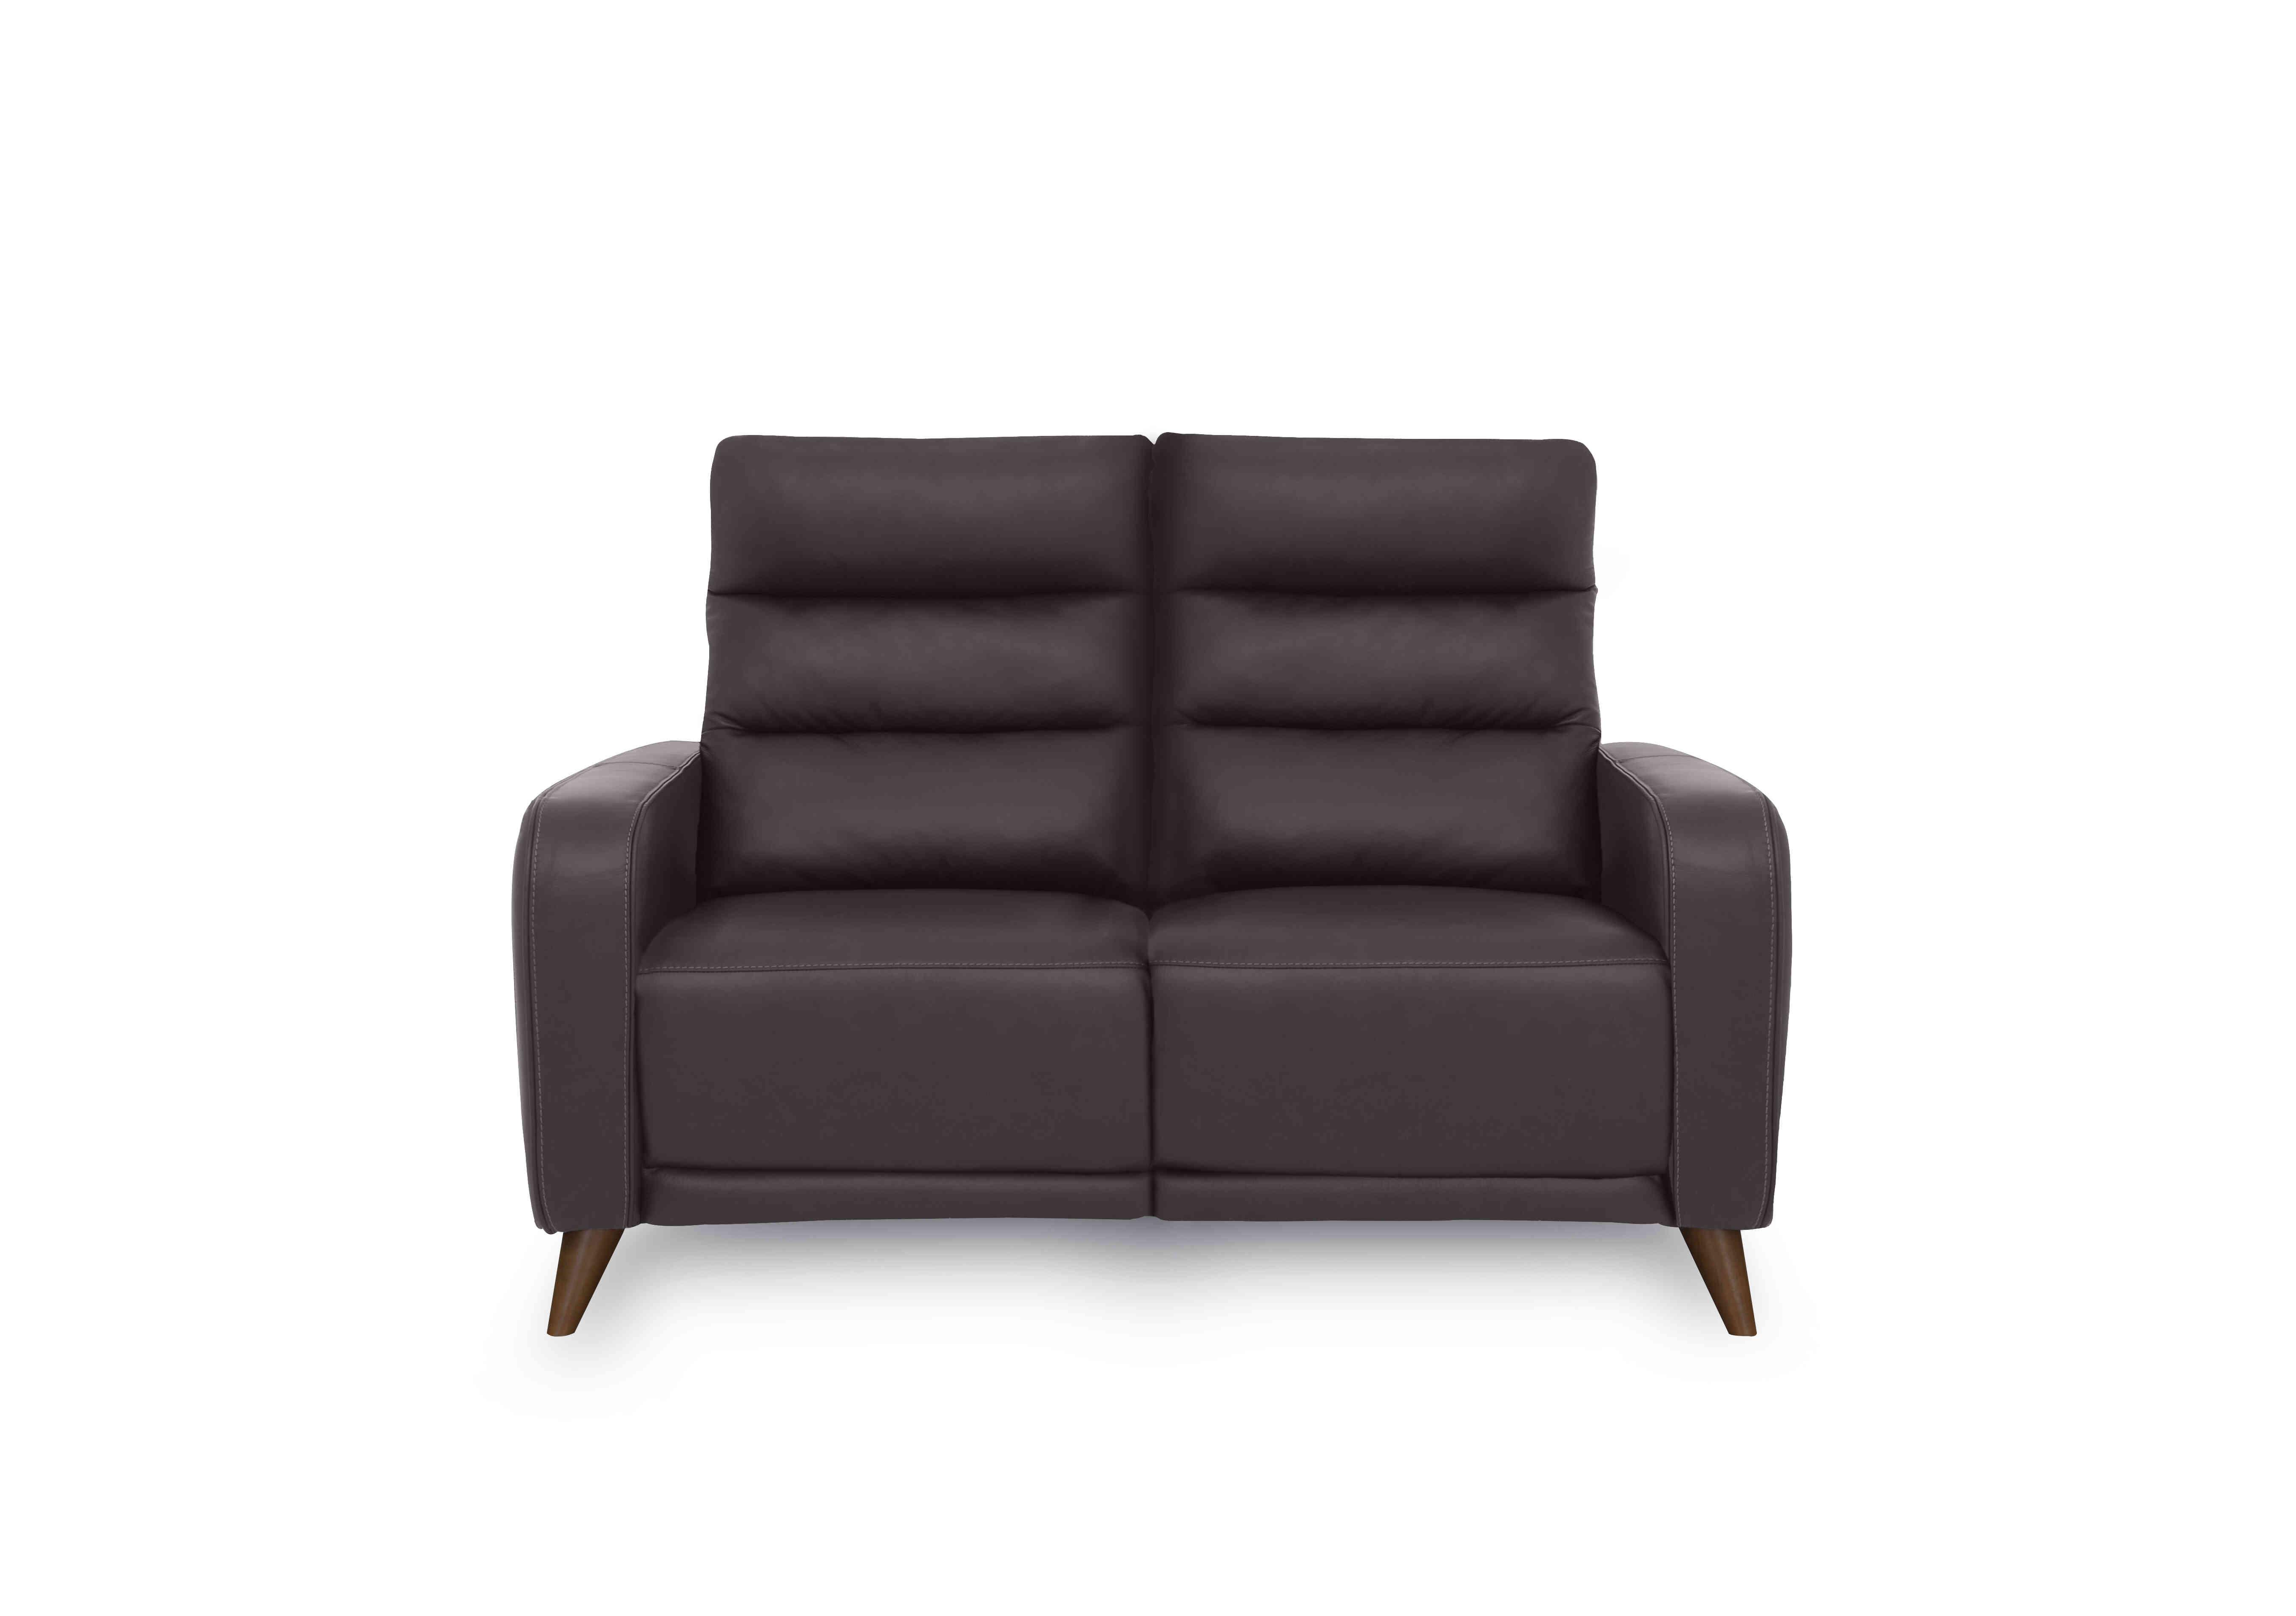 Quinn 2 Seater Leather Sofa in Lx-6404 Piompo on Furniture Village